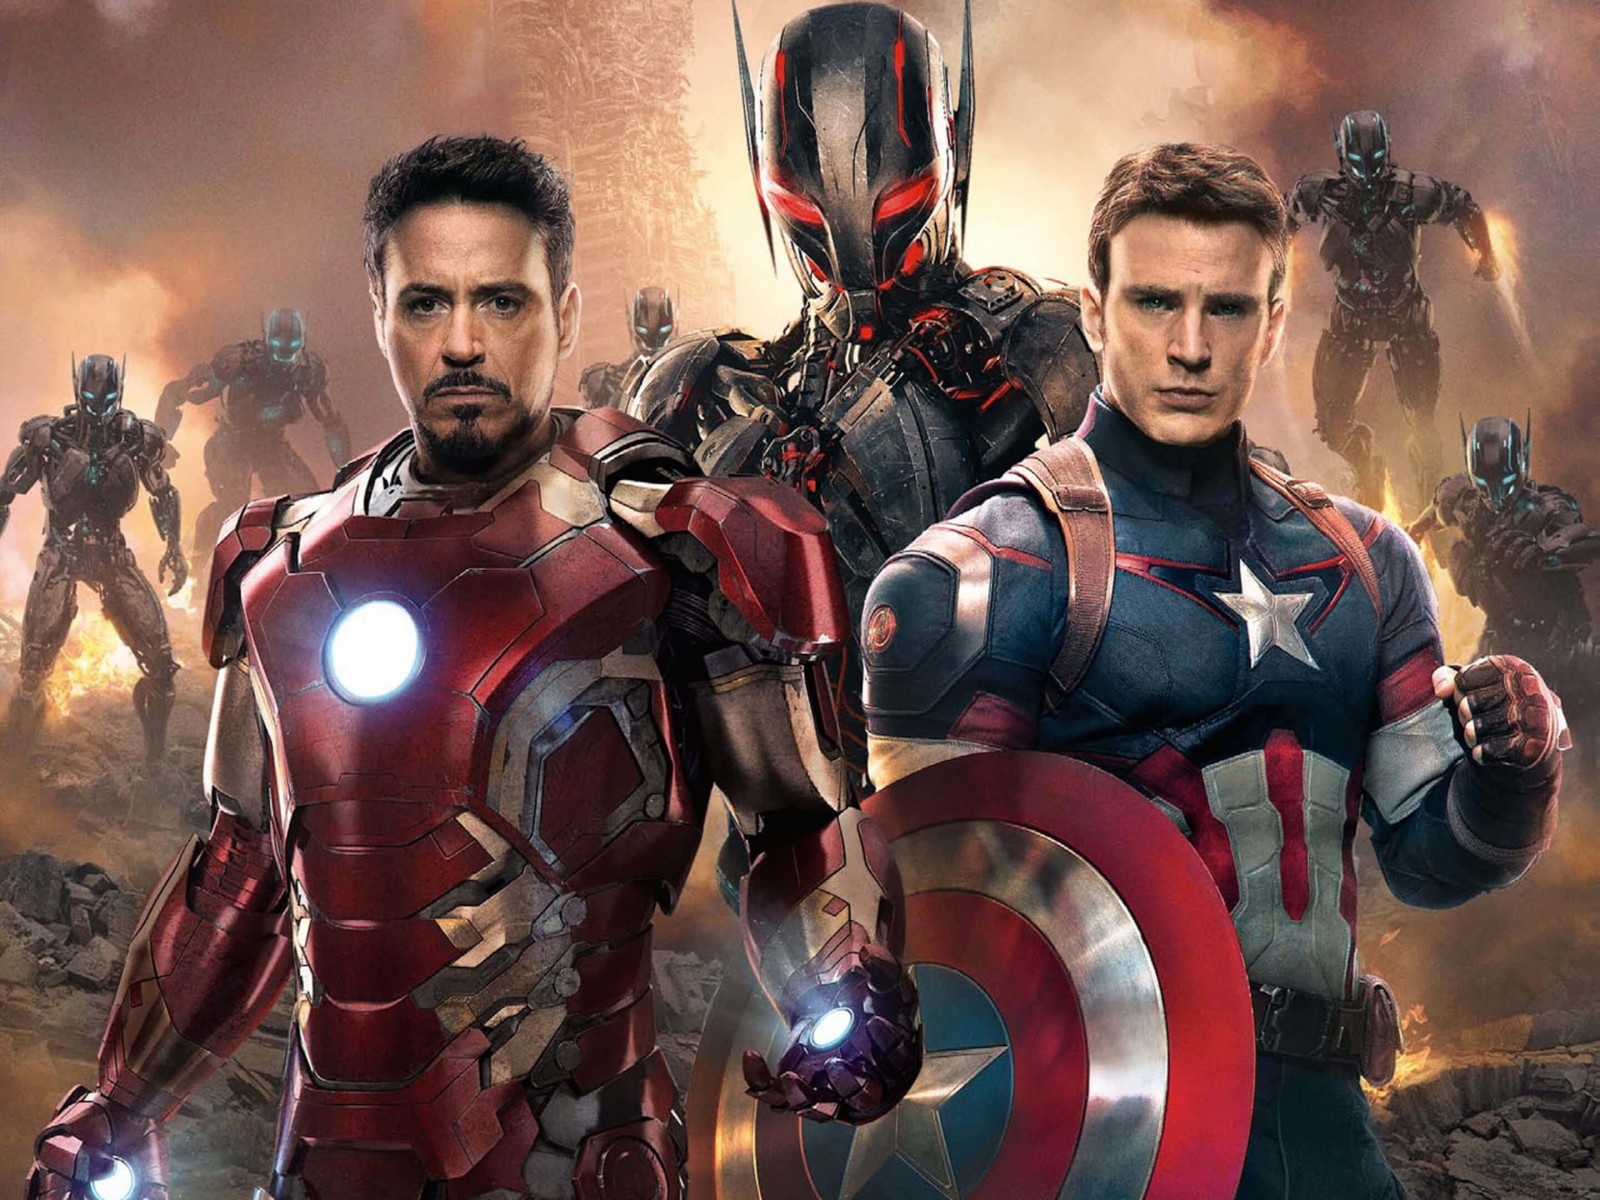 The Avengers: Age of Ultron - Iron Man and Captain America Wallpaper for Desktop 1600x1200